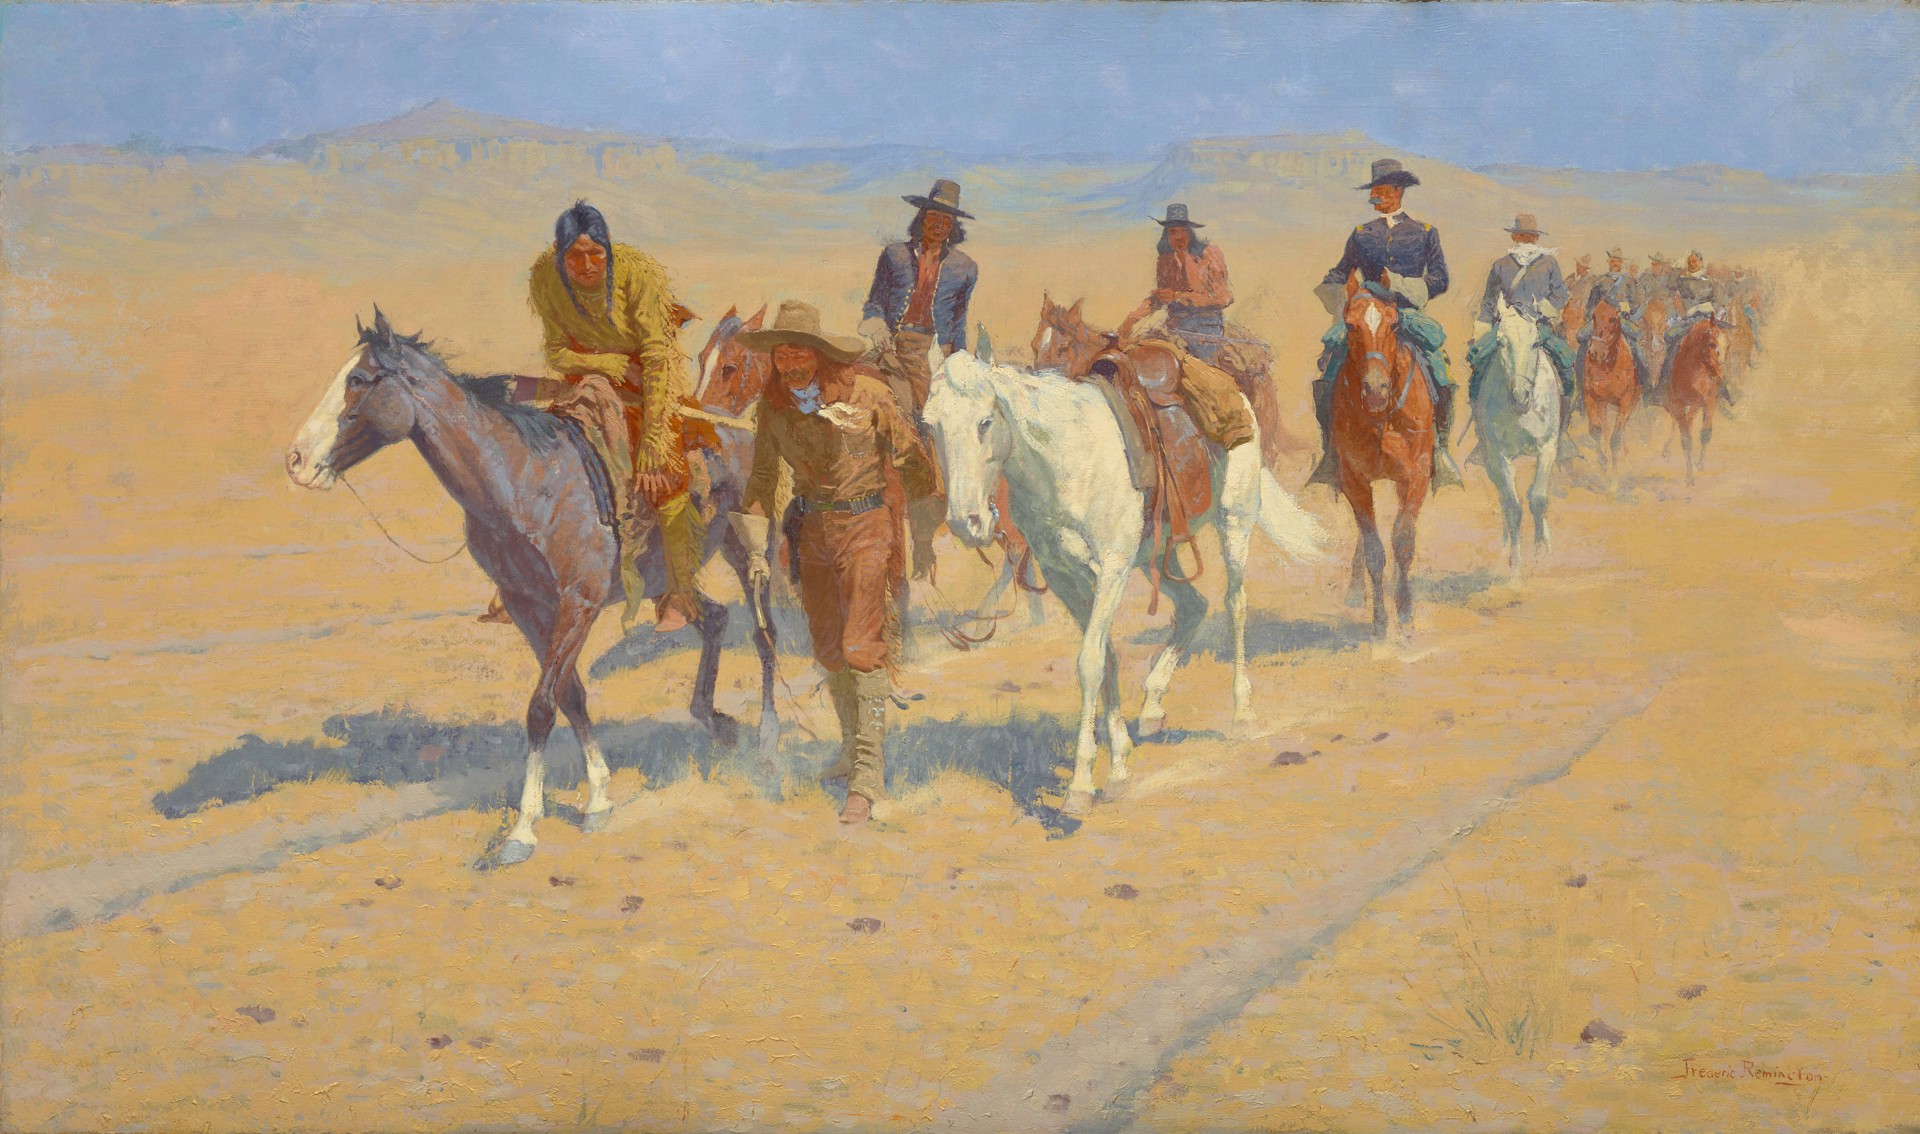 Pony Tracks in the Buffalo Trails, by Frederic Remington